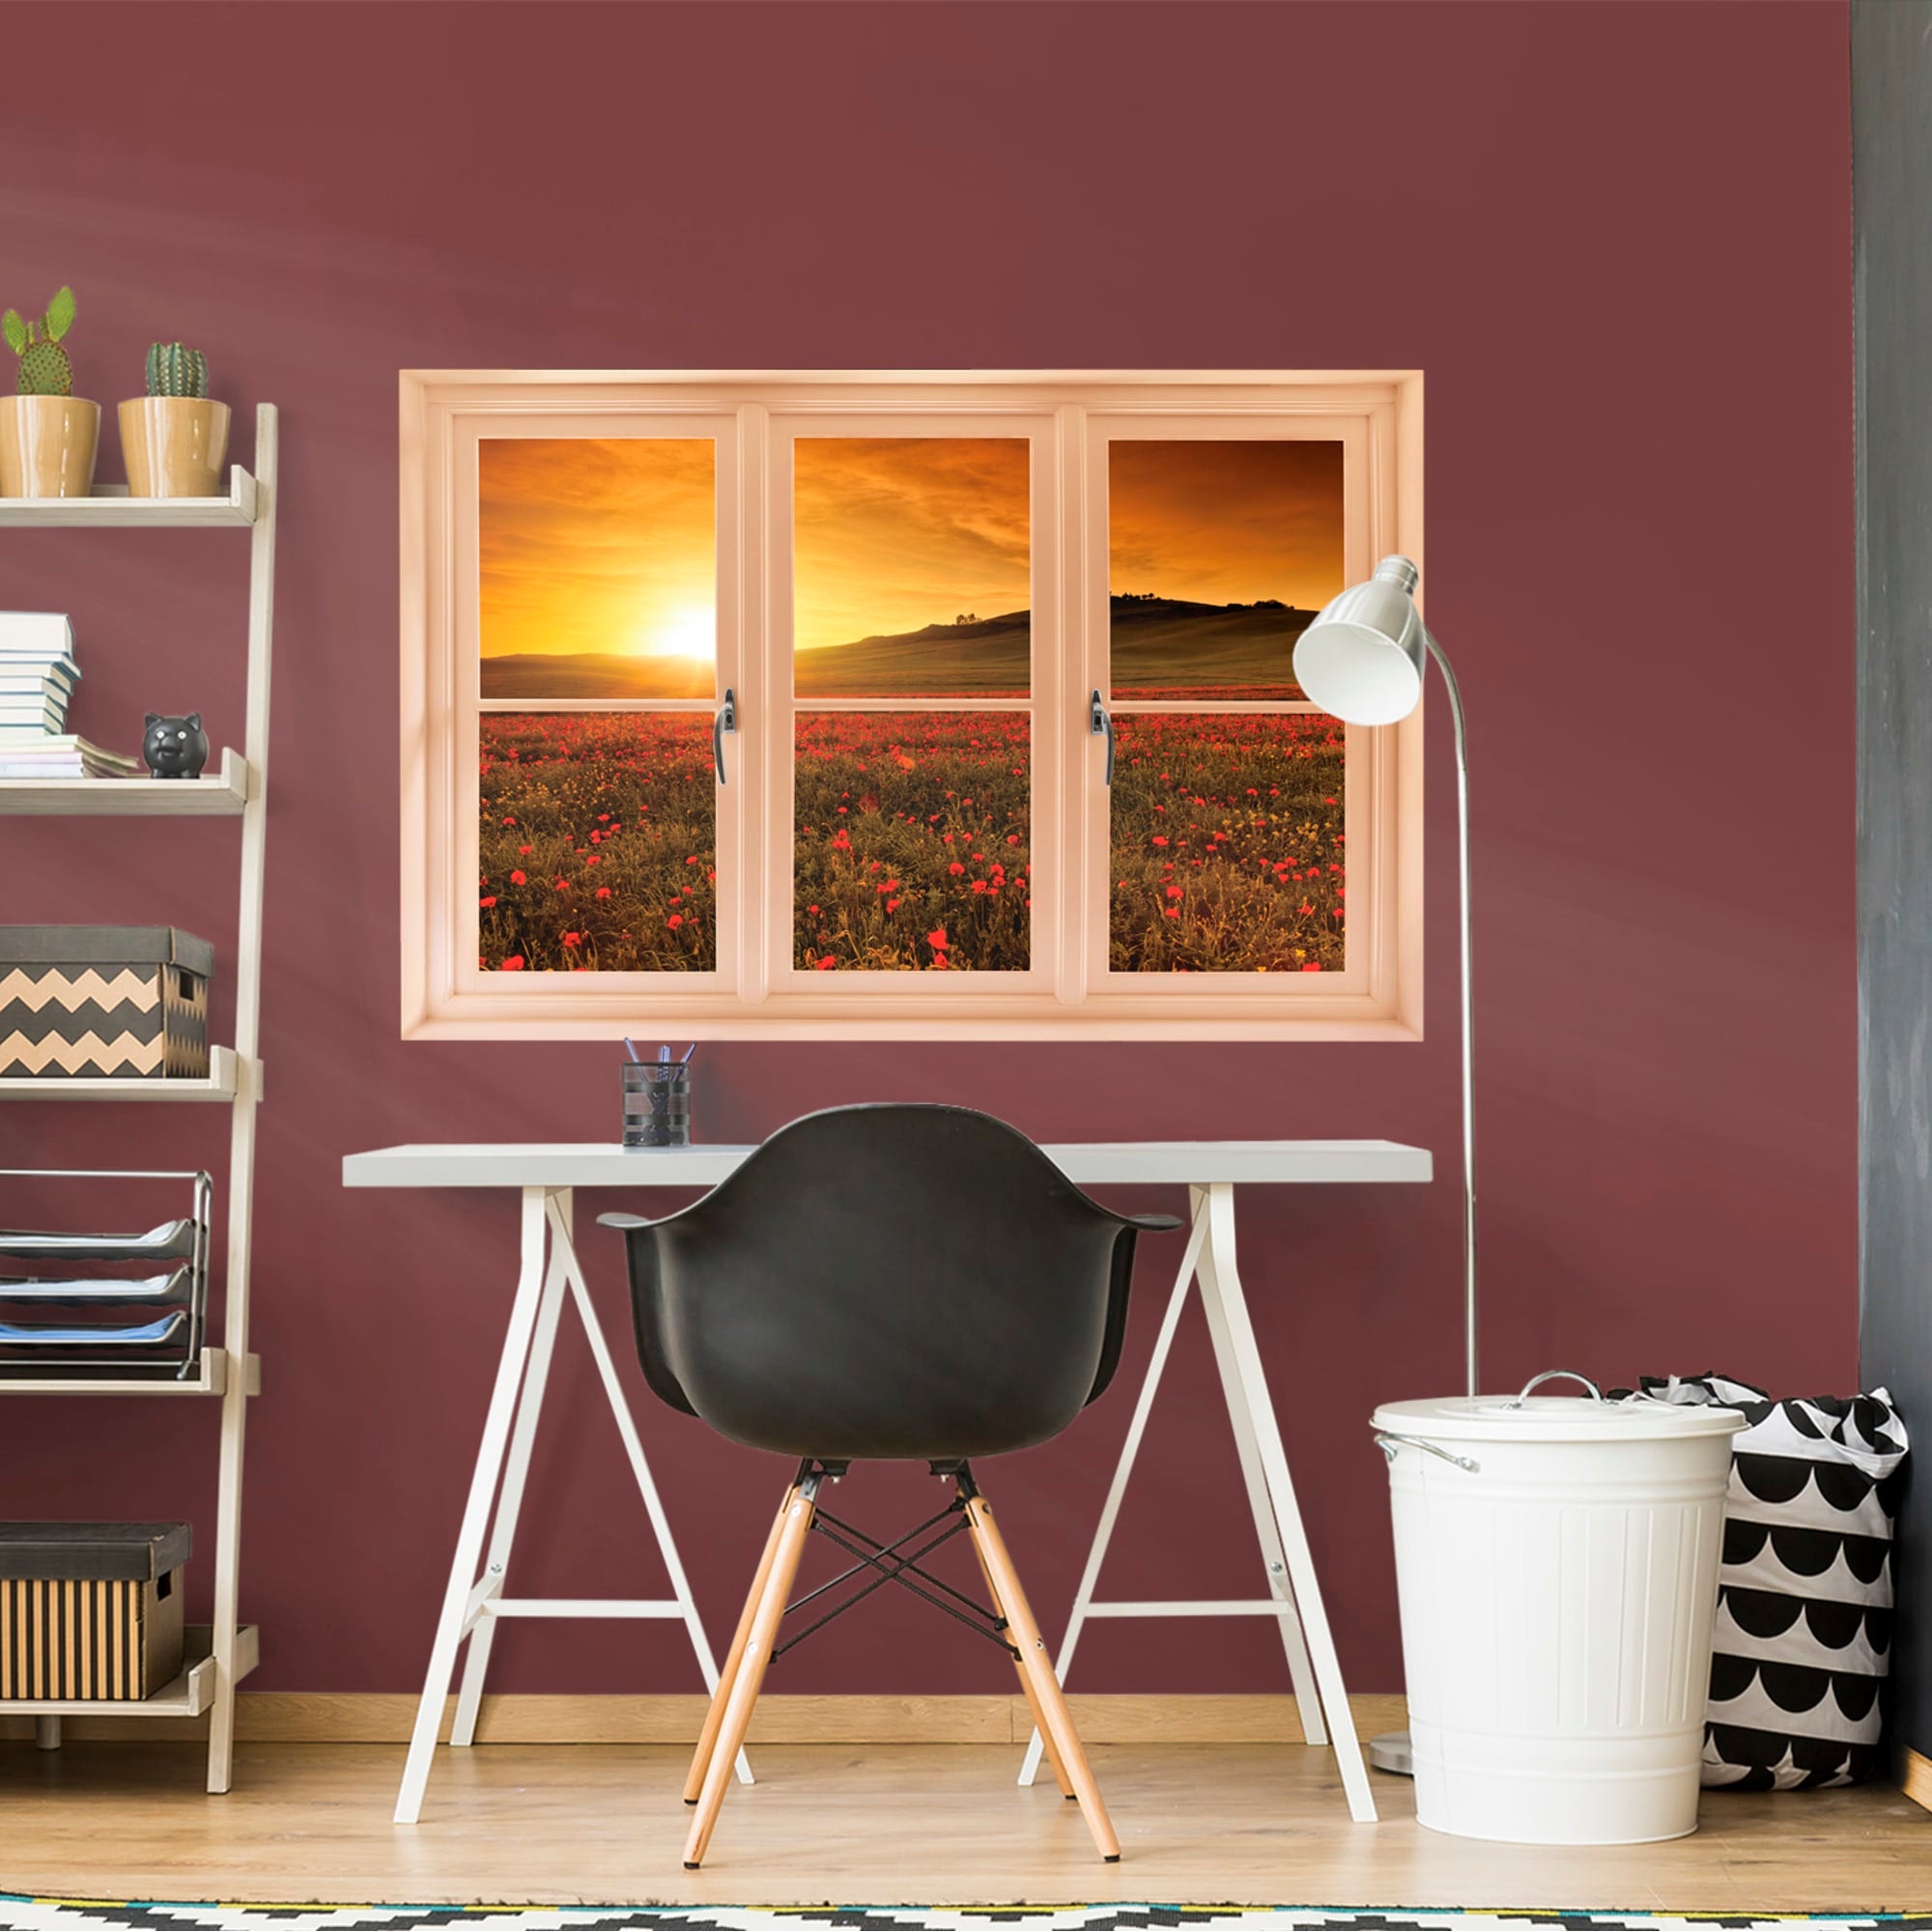 Instant Window: Poppy Field at Sunset, Tuscany - Removable Wall Graphic 51.0"W x 34.0"H by Fathead | Vinyl